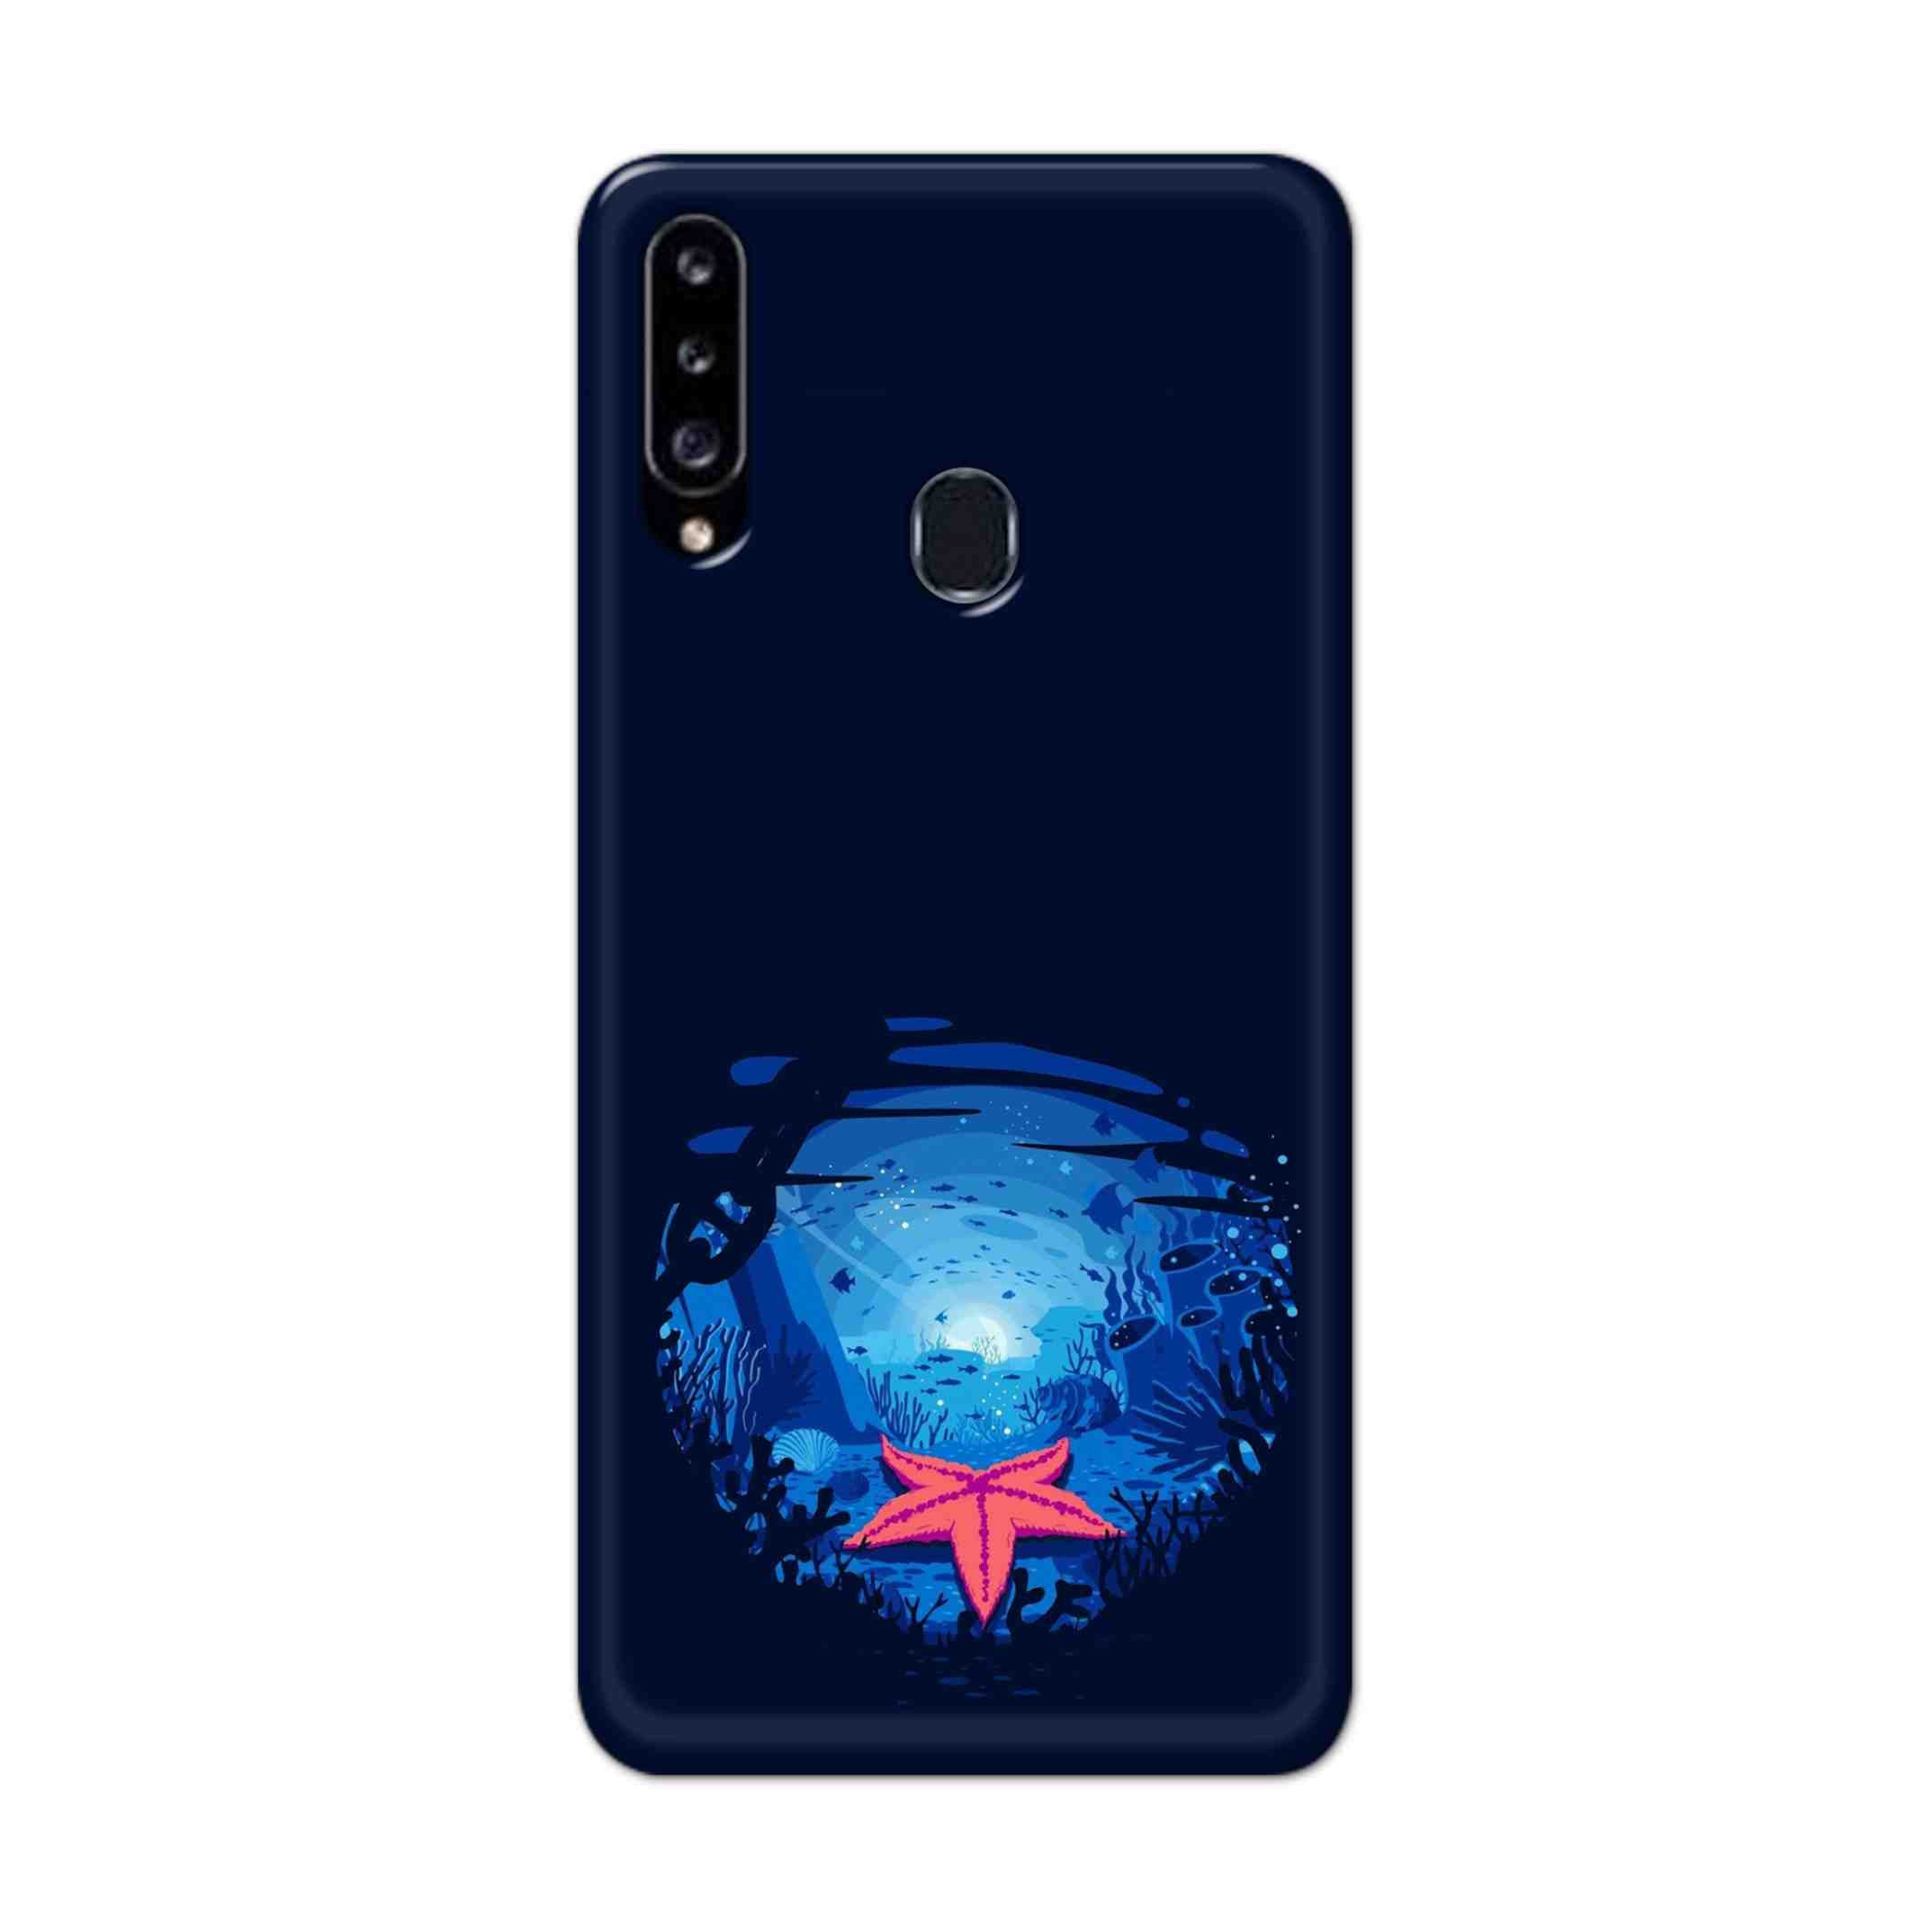 Buy Star Fresh Hard Back Mobile Phone Case Cover For Samsung Galaxy A21 Online